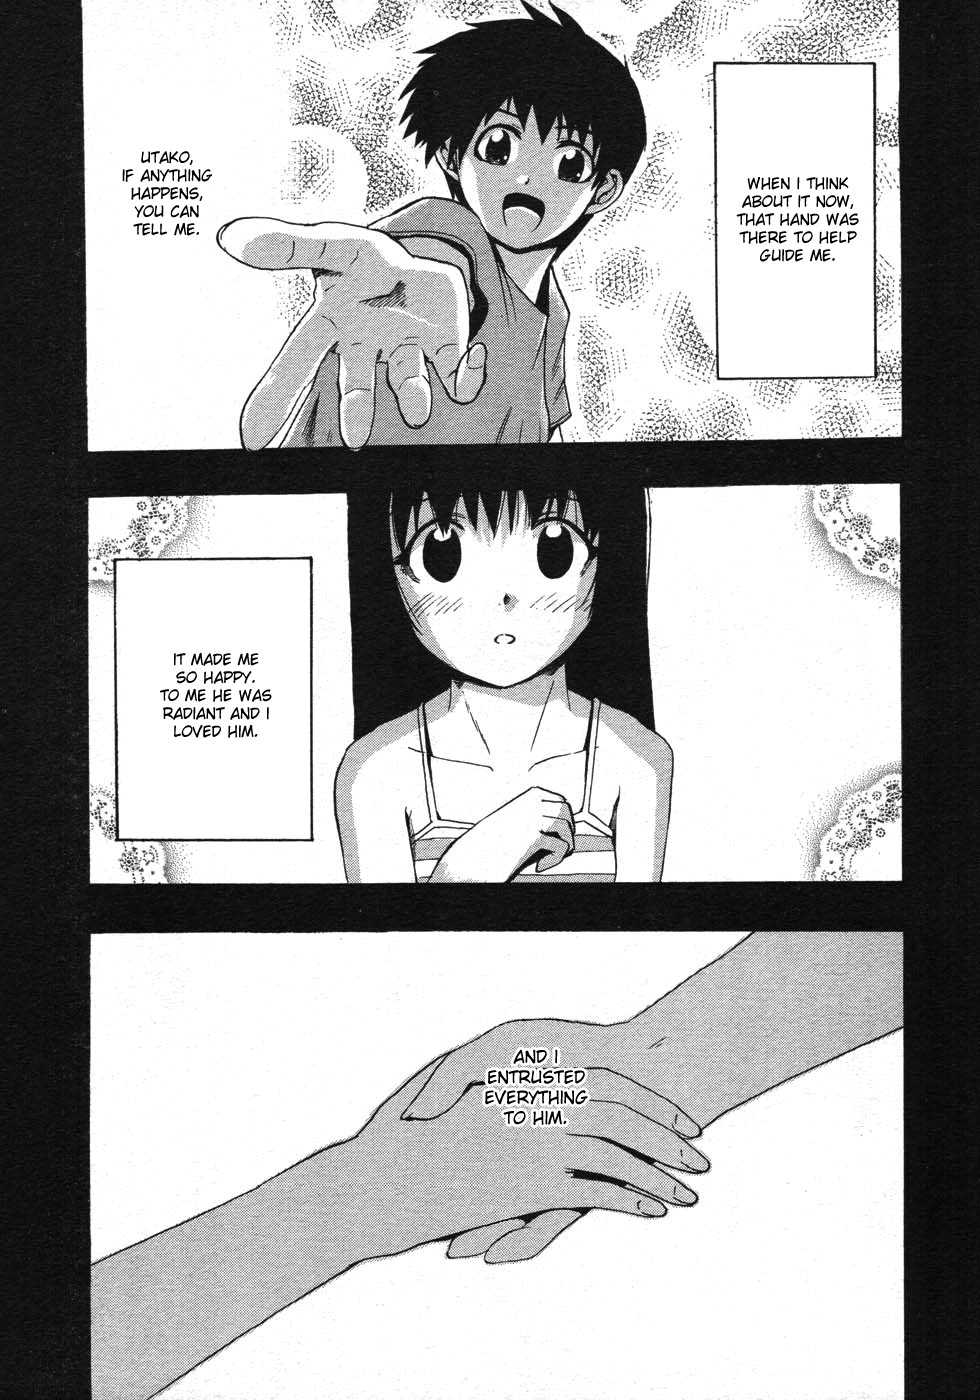 When you let go of my hands 74 hentai manga